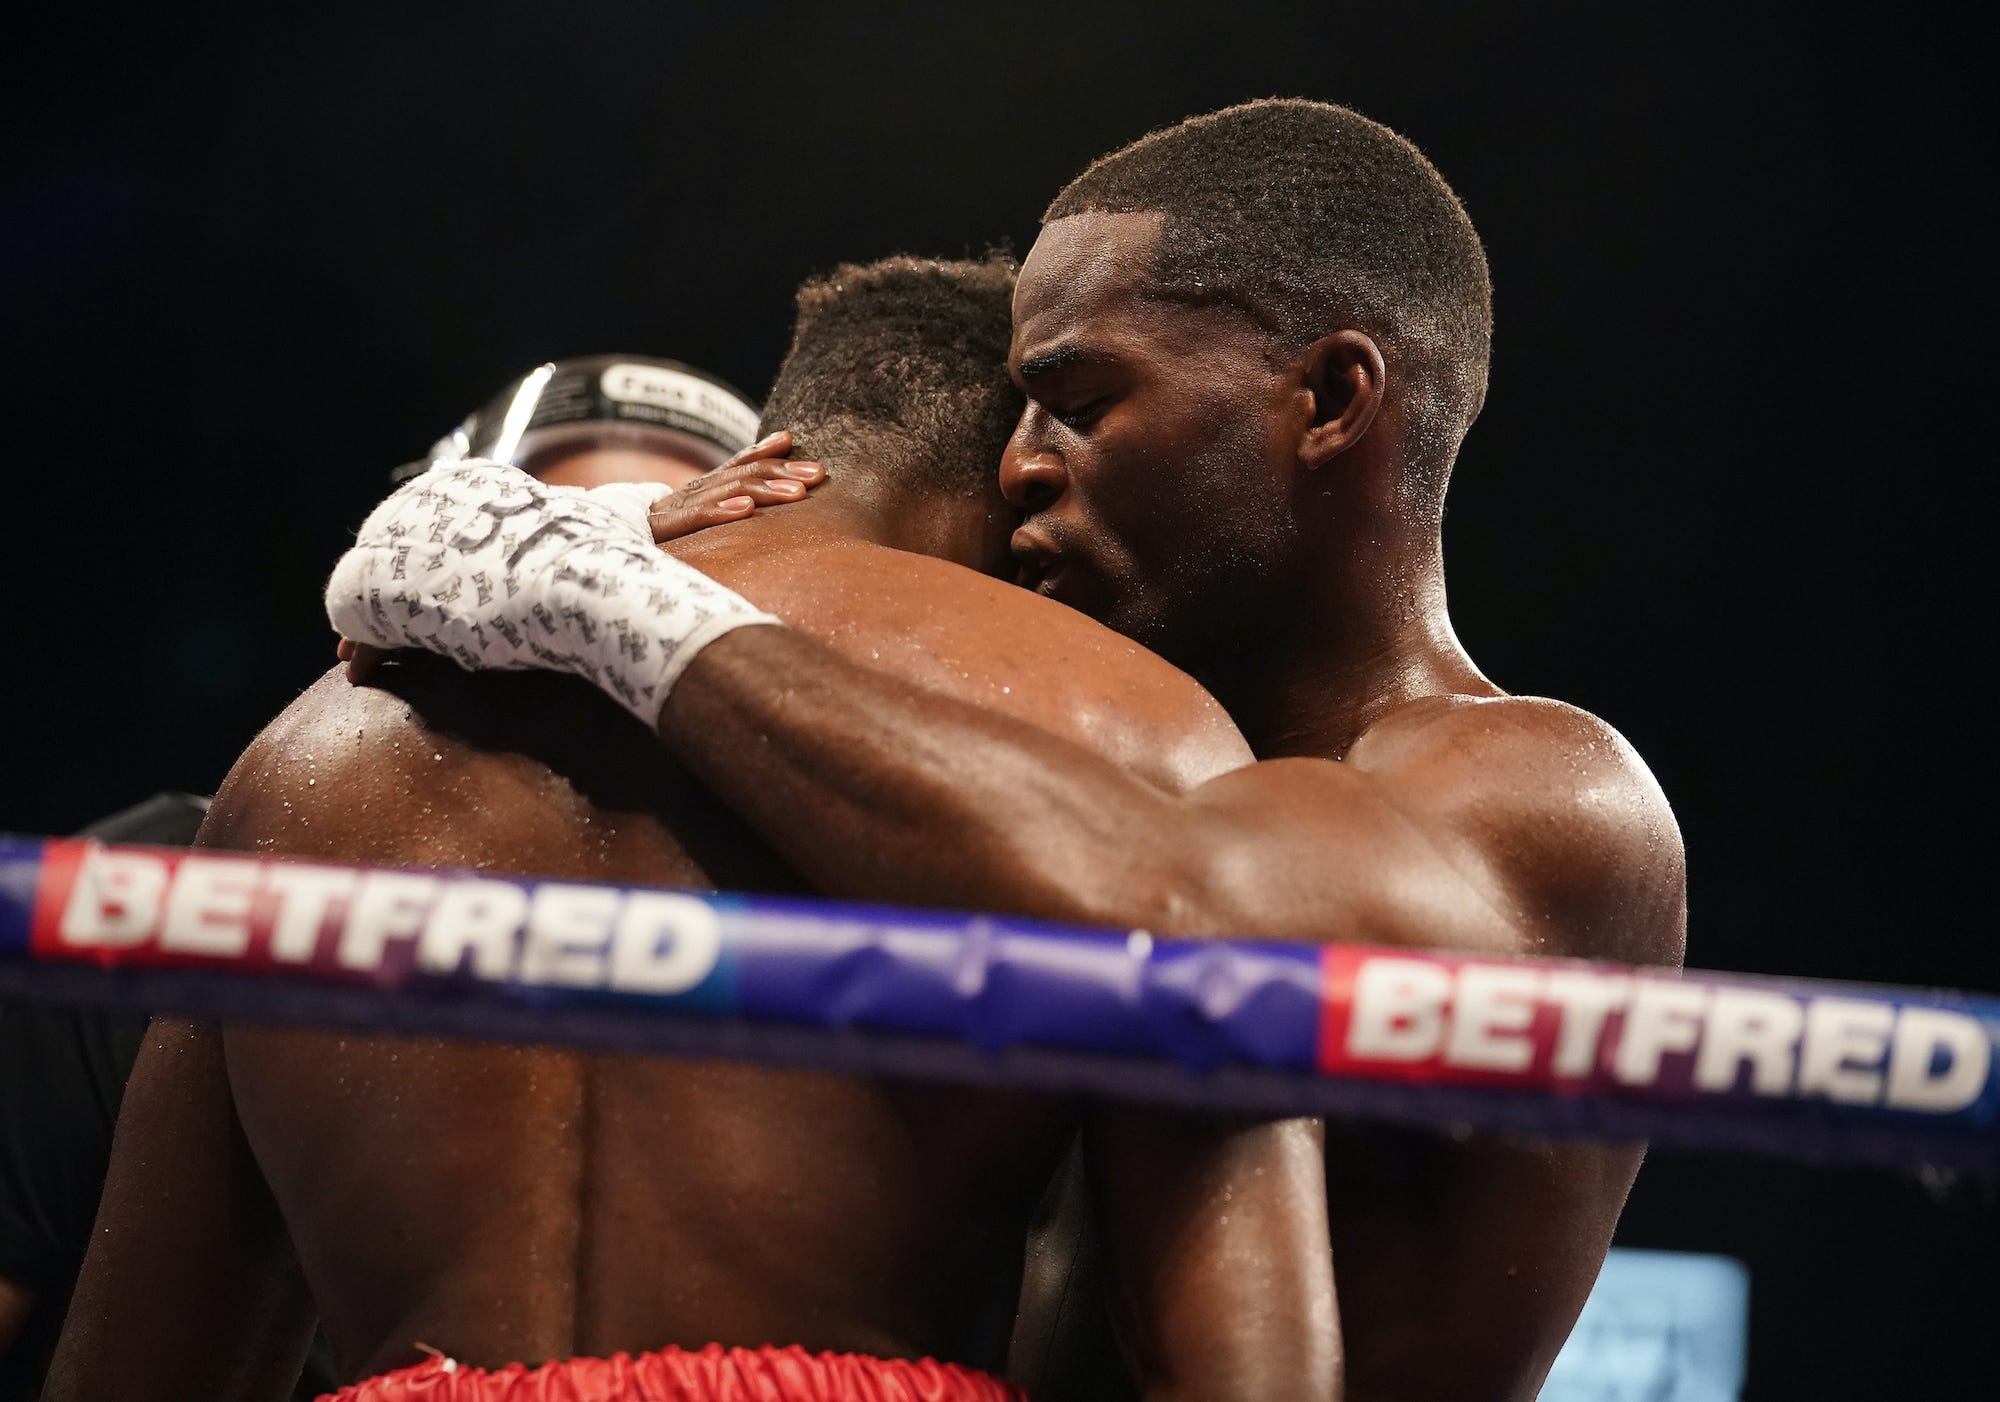 Joshua Buatsi destroyed Daniel dos Santos in 4 rounds before consoling him when he cried in the ring